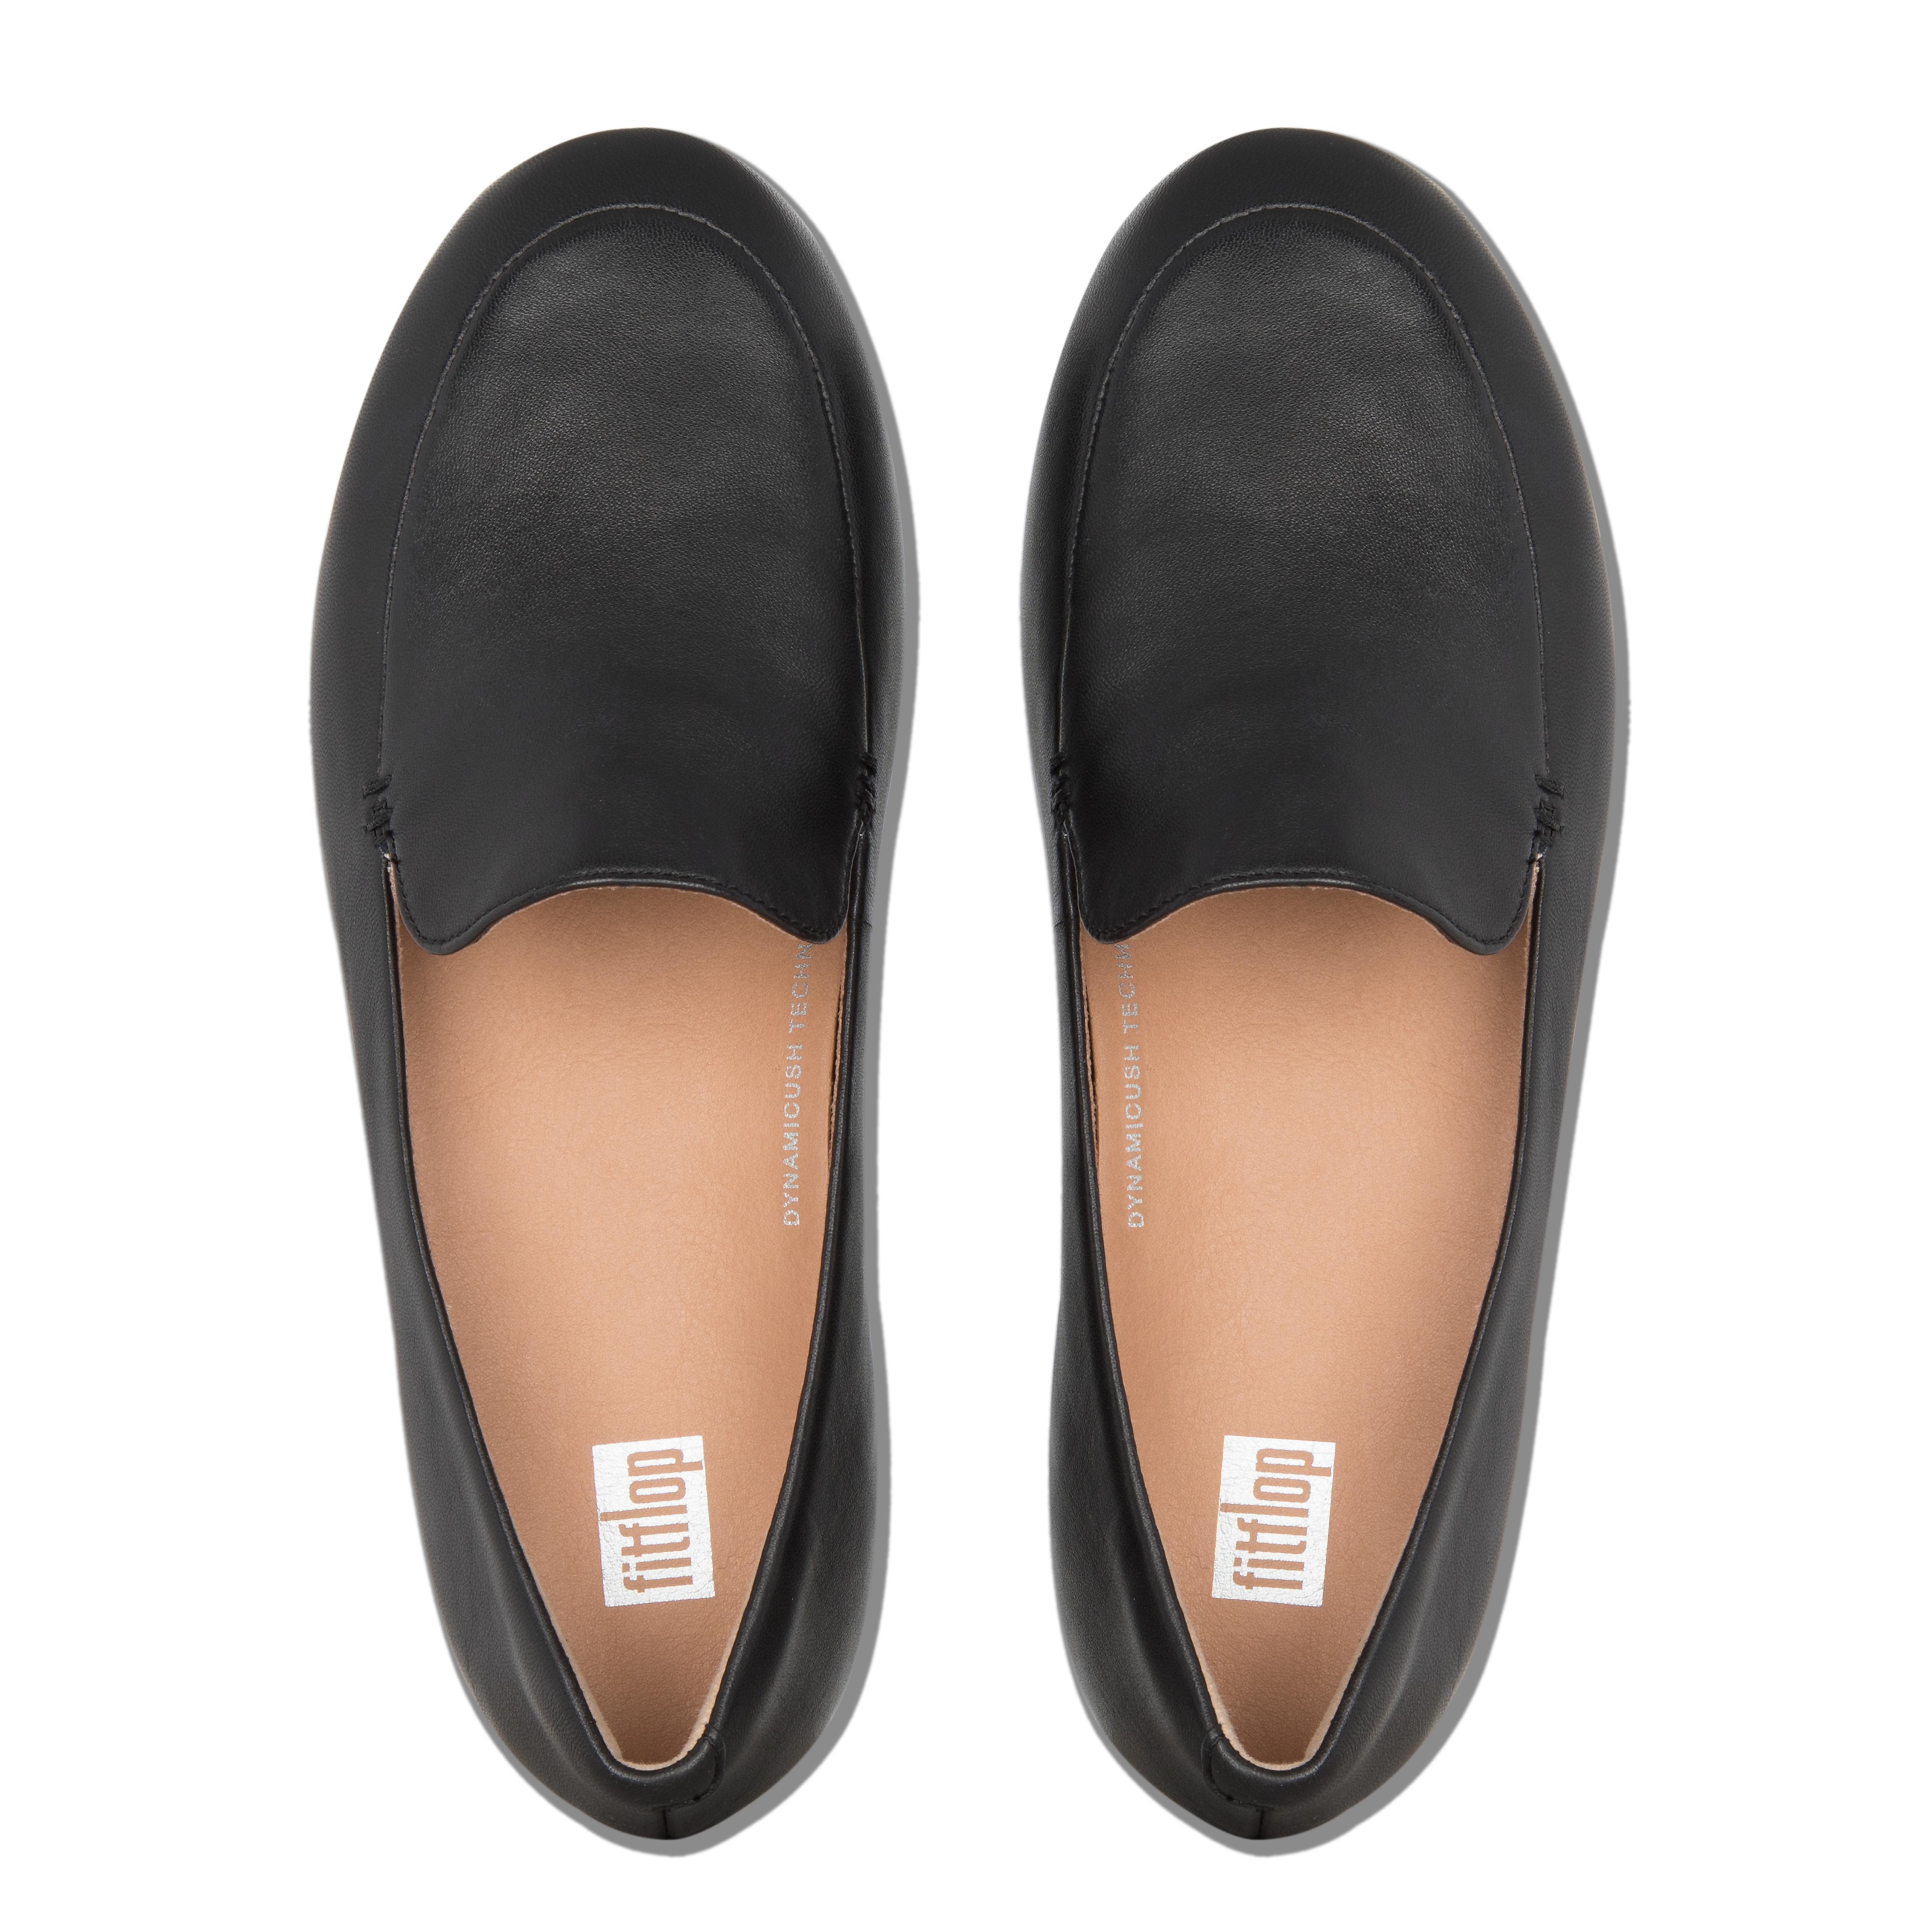 fitflop slip ons